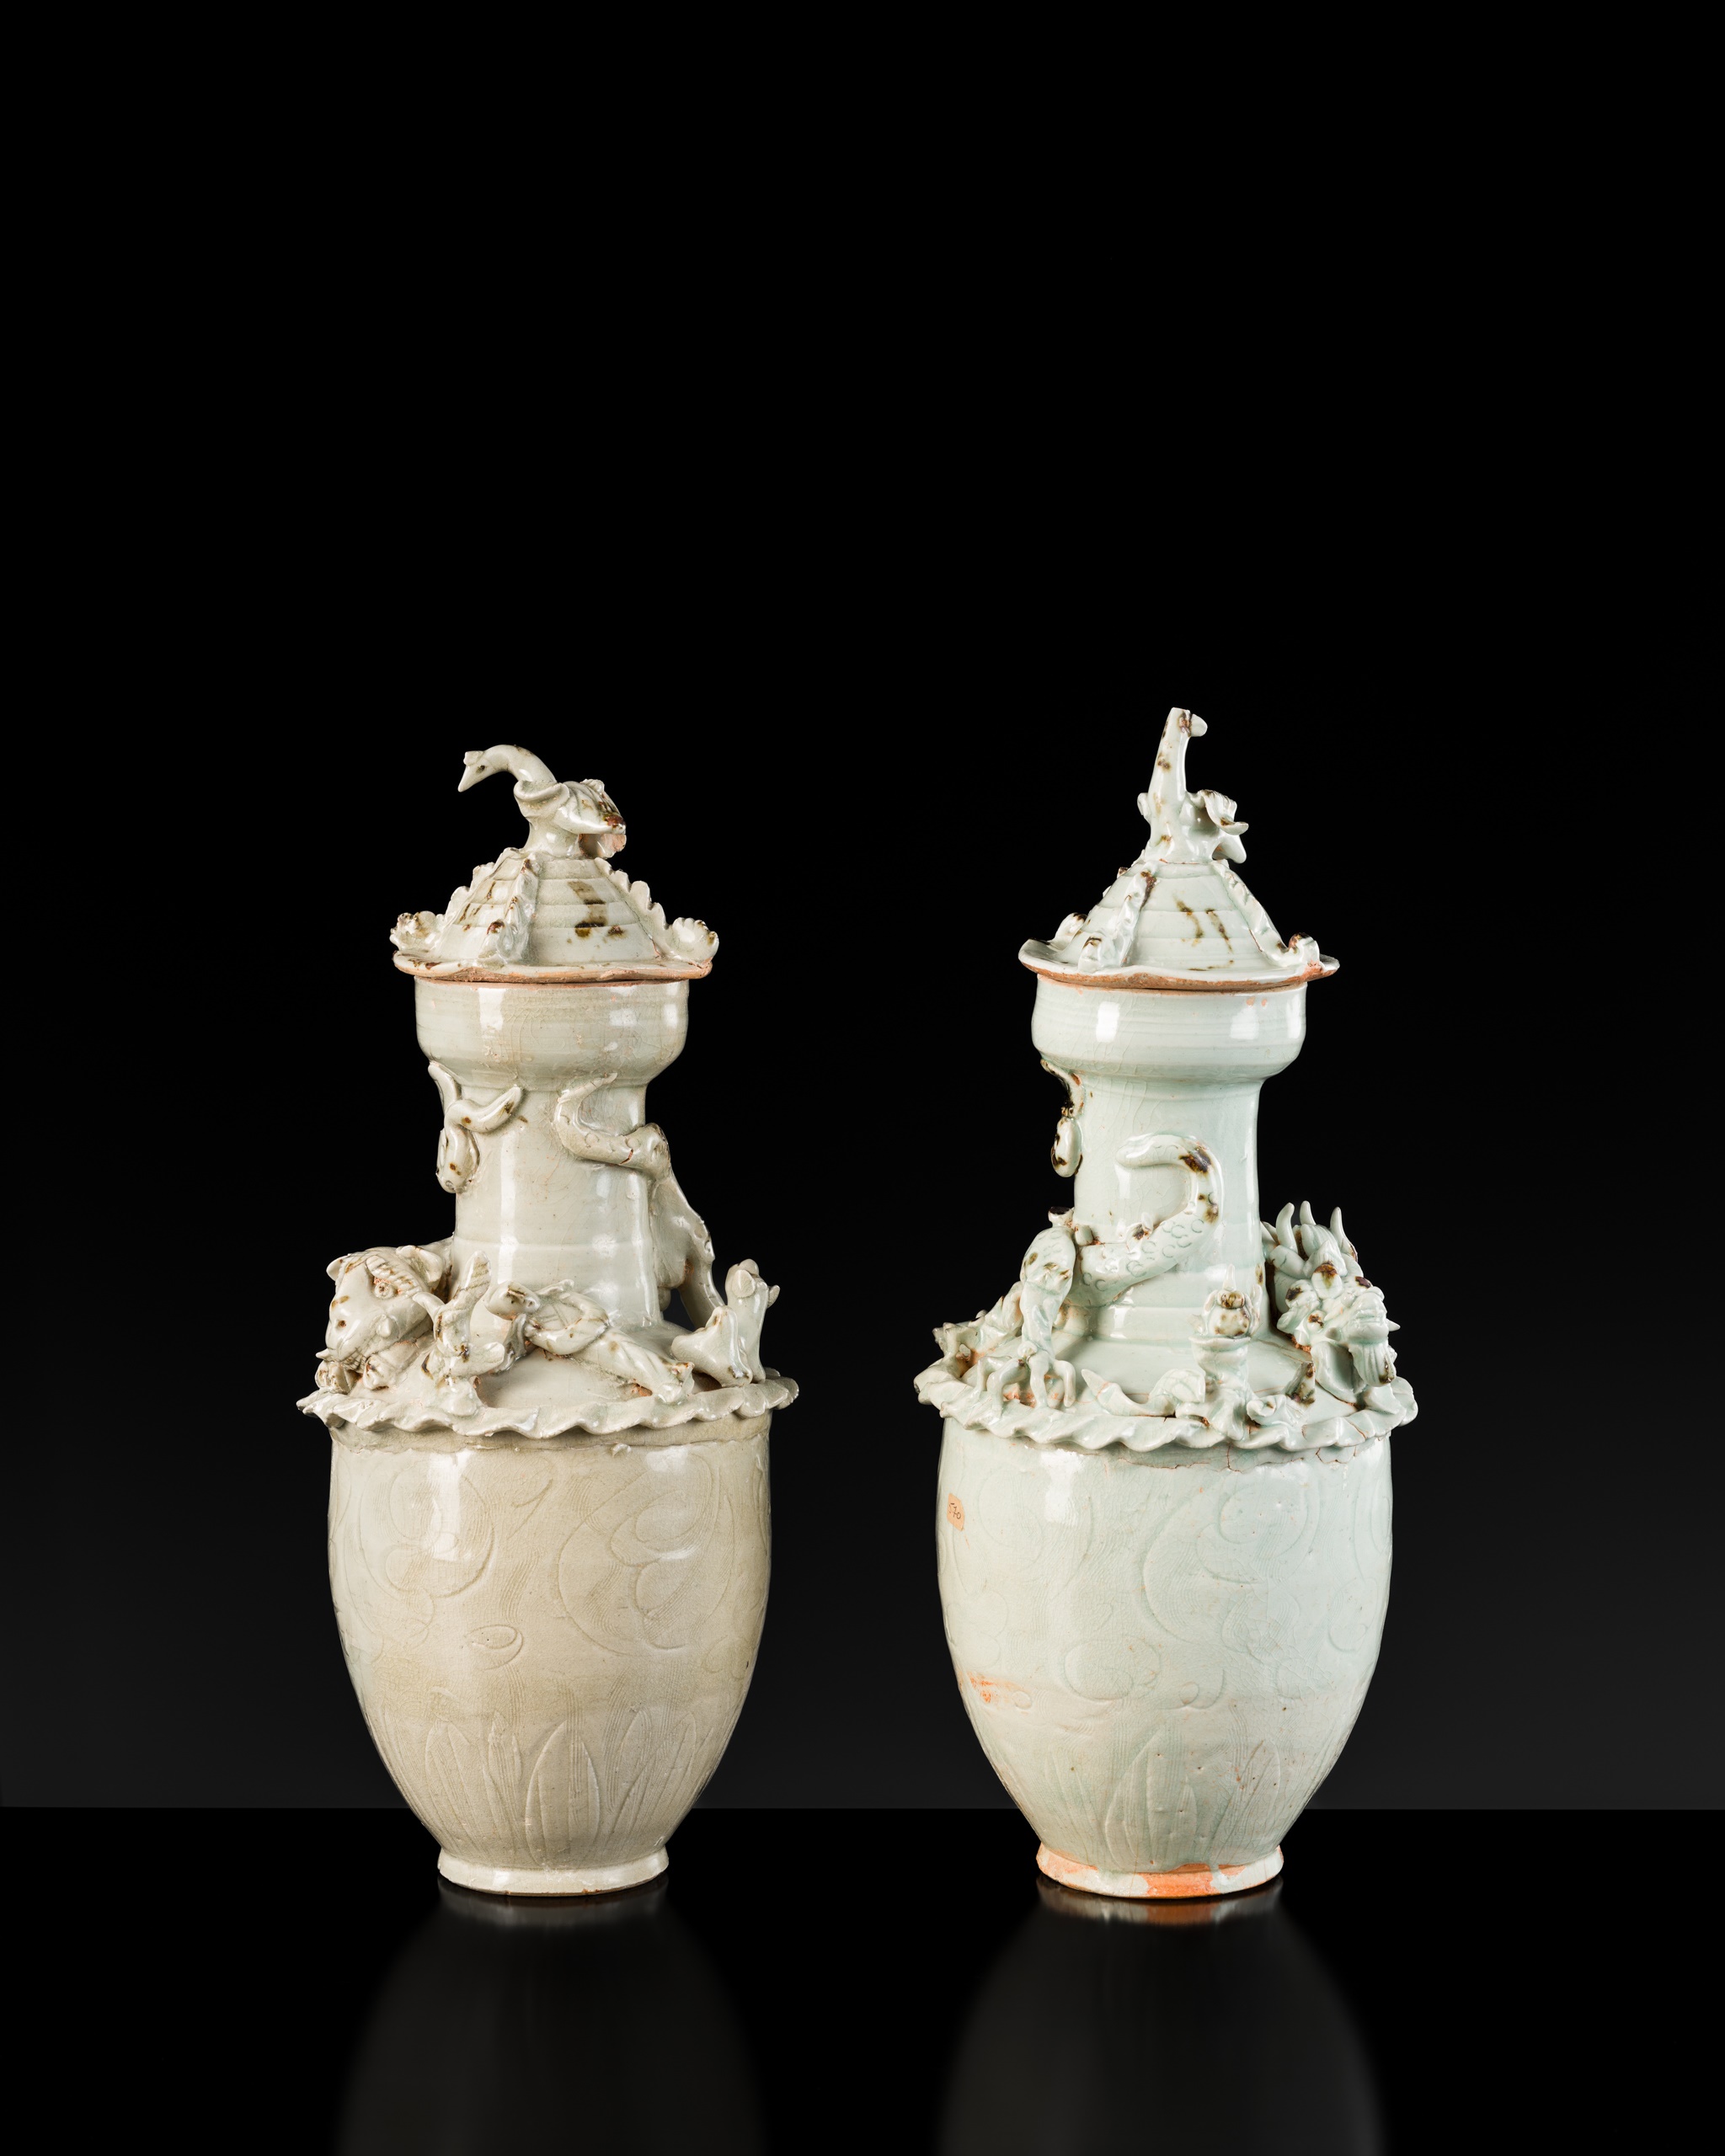 A PAIR OF QINGBAI FUNERARY JARS AND COVERS, SONG DYNASTY - Image 6 of 12